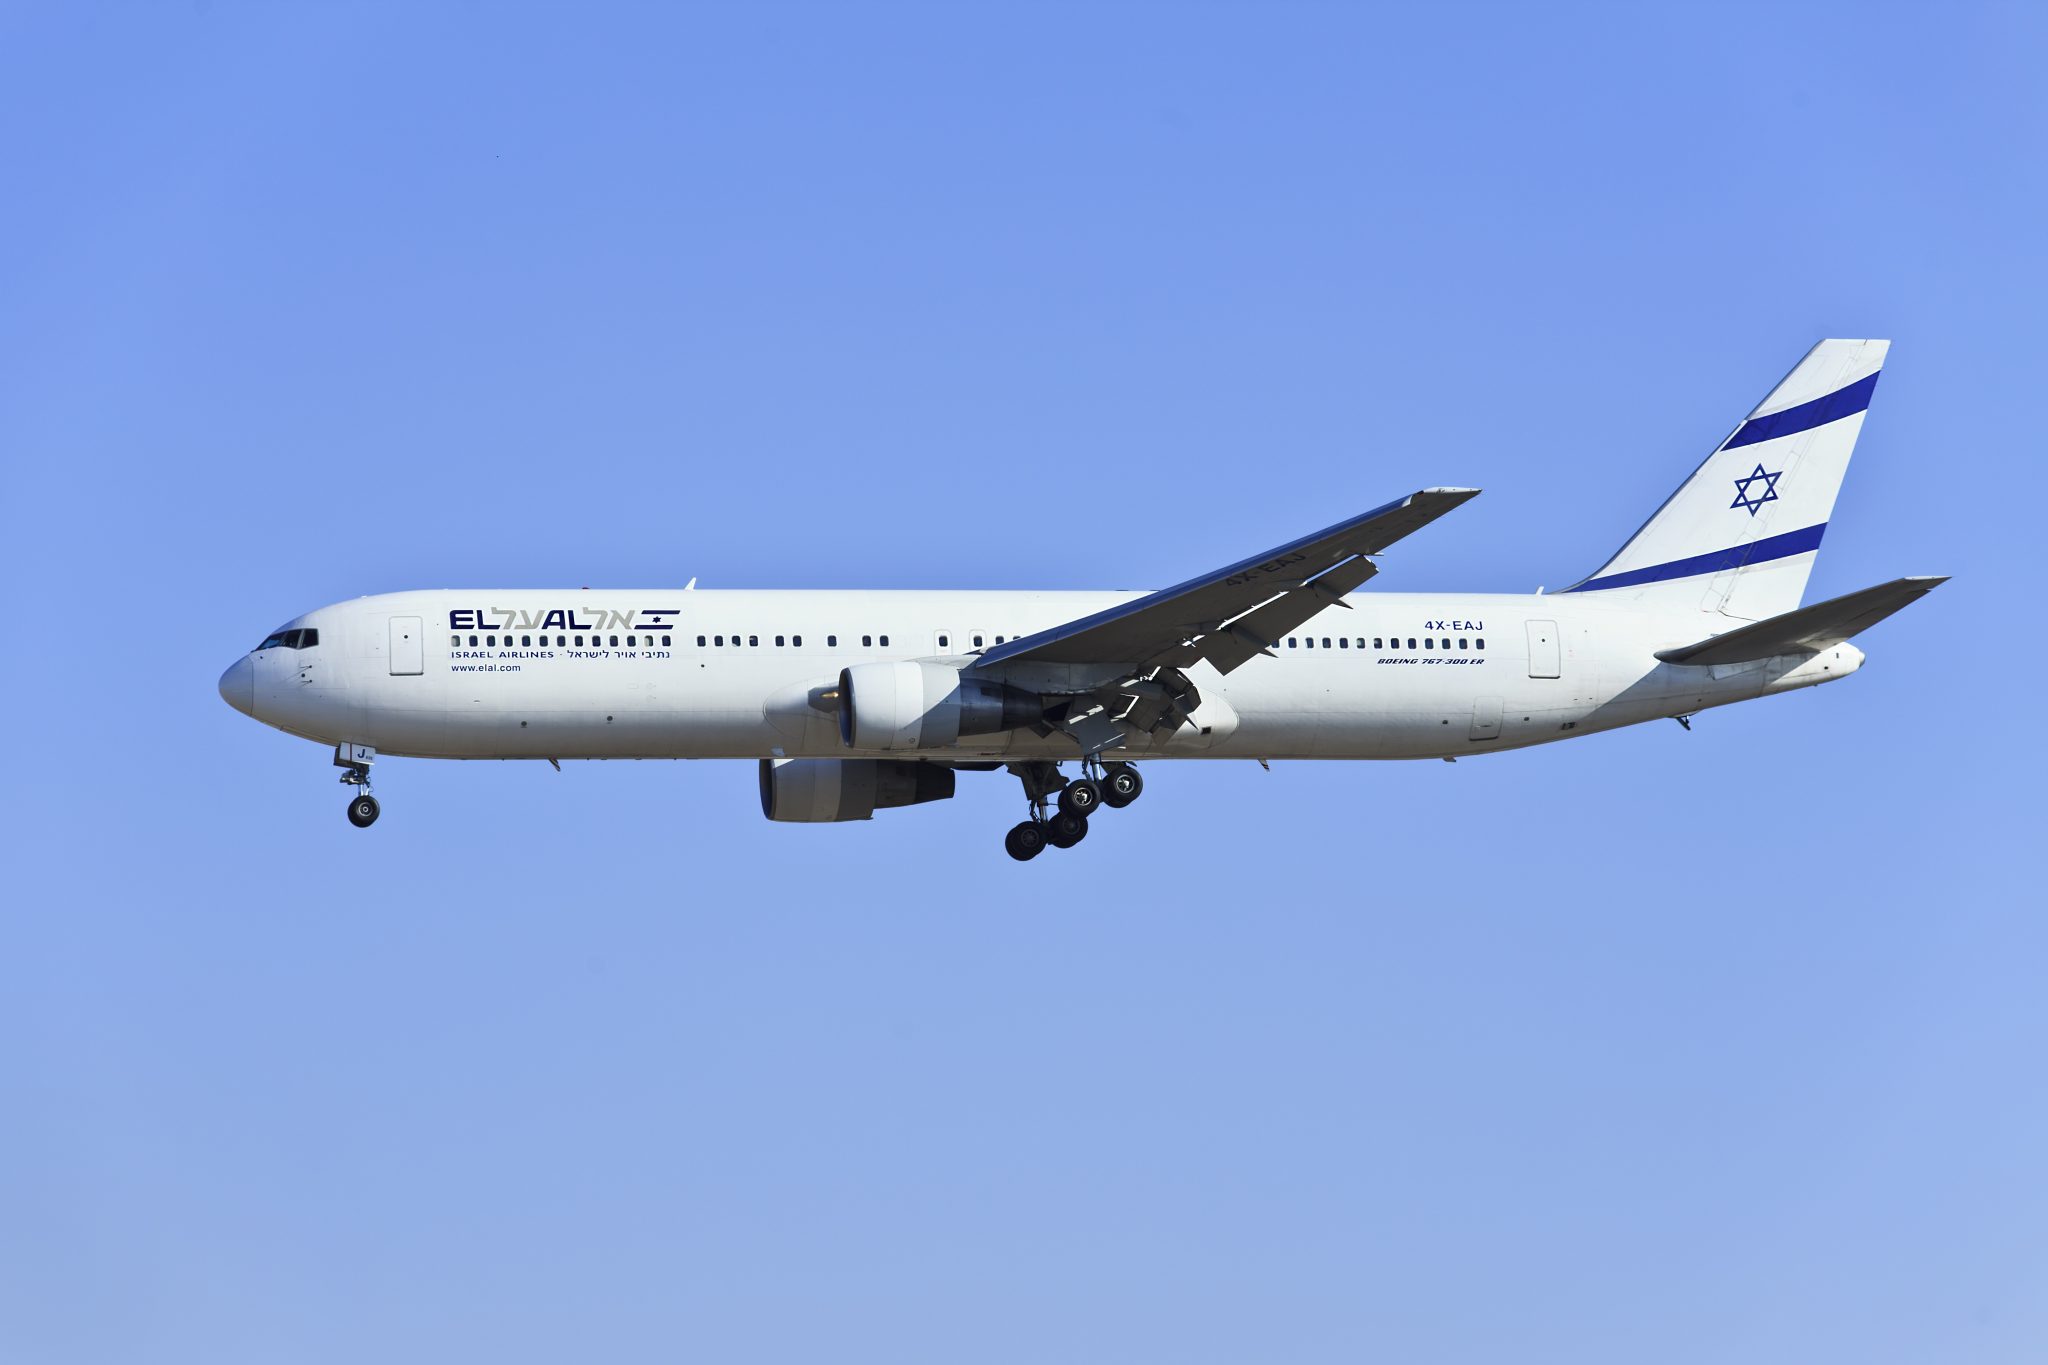 El Al Israeli Airlines selects ePlane Autopilot to manage its daily aircraft parts sourcing activities